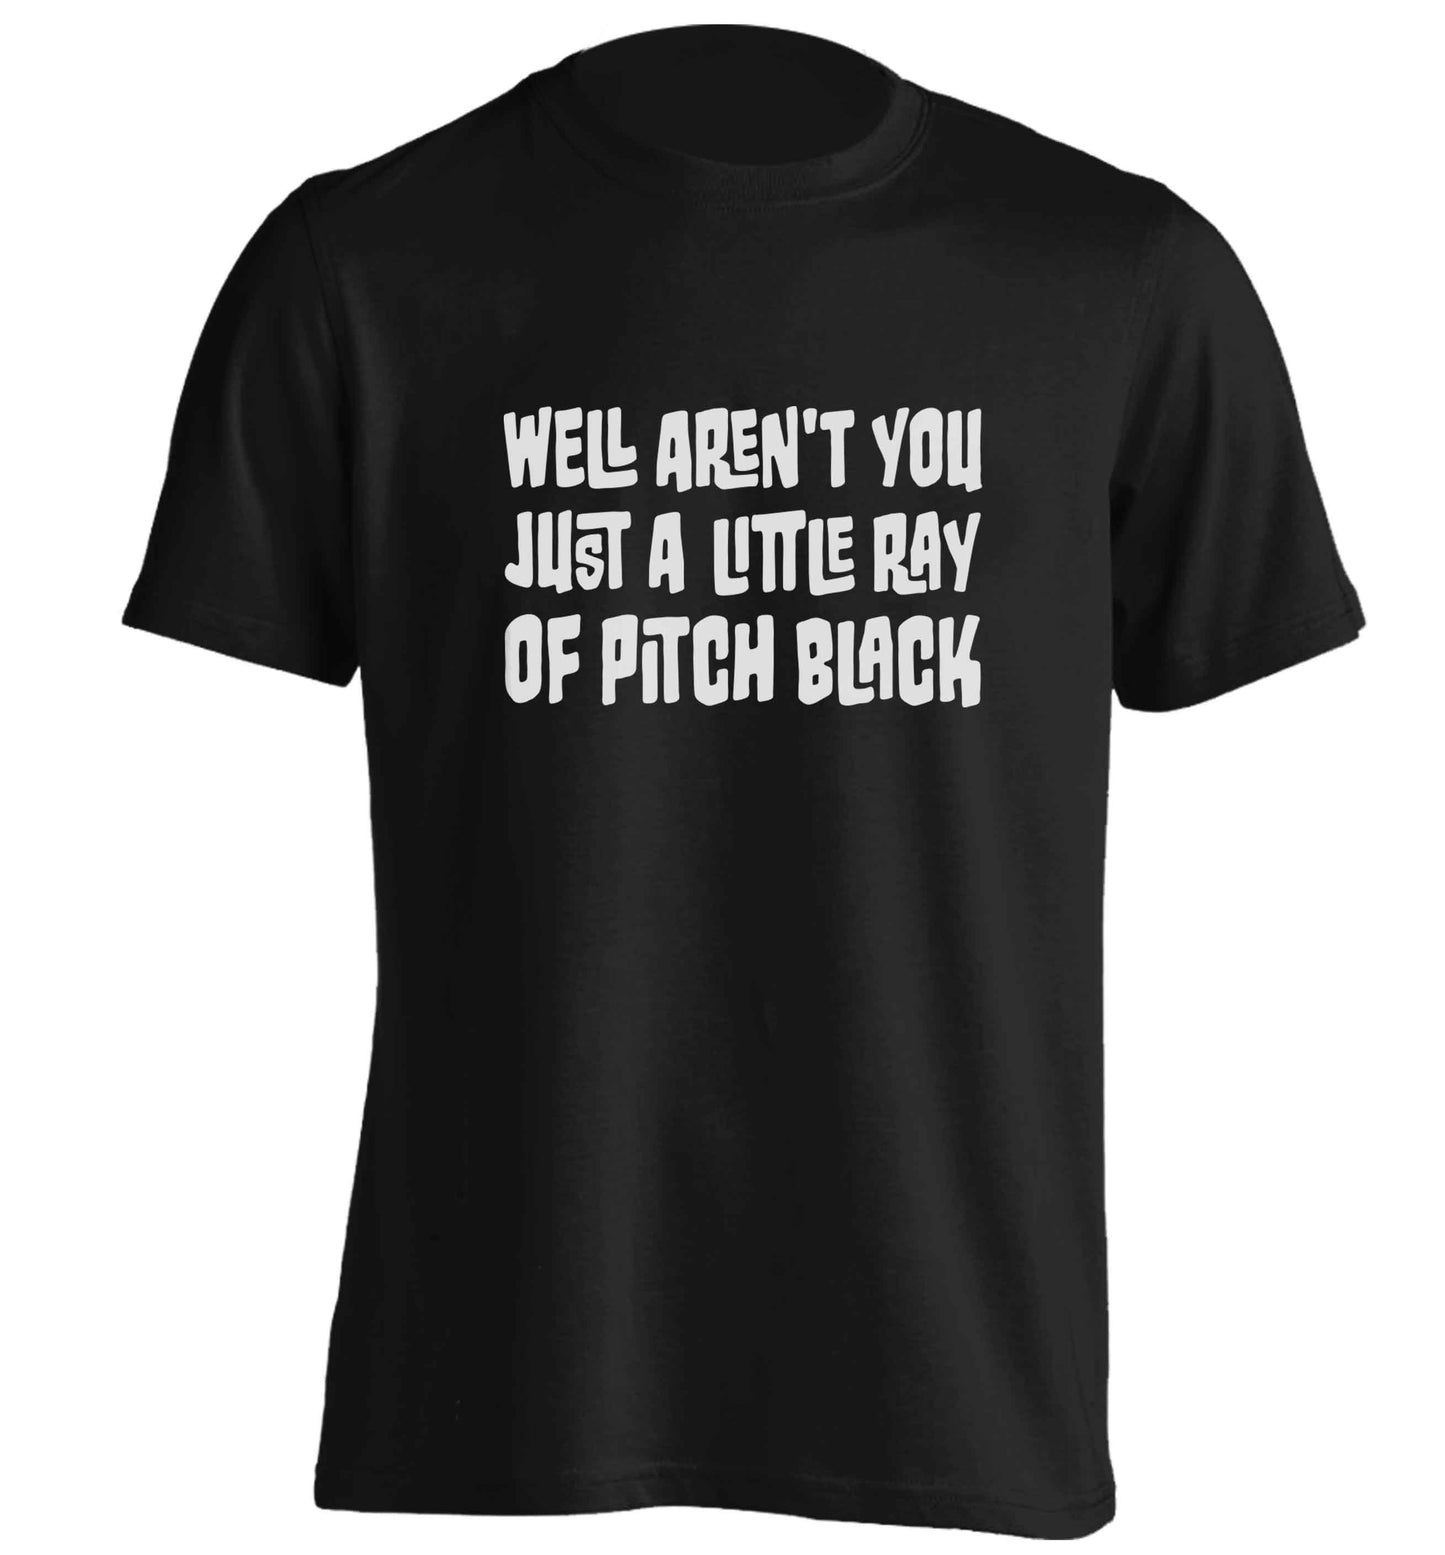 Well aren't you just a little ray of pitch black Kit adults unisex black Tshirt 2XL